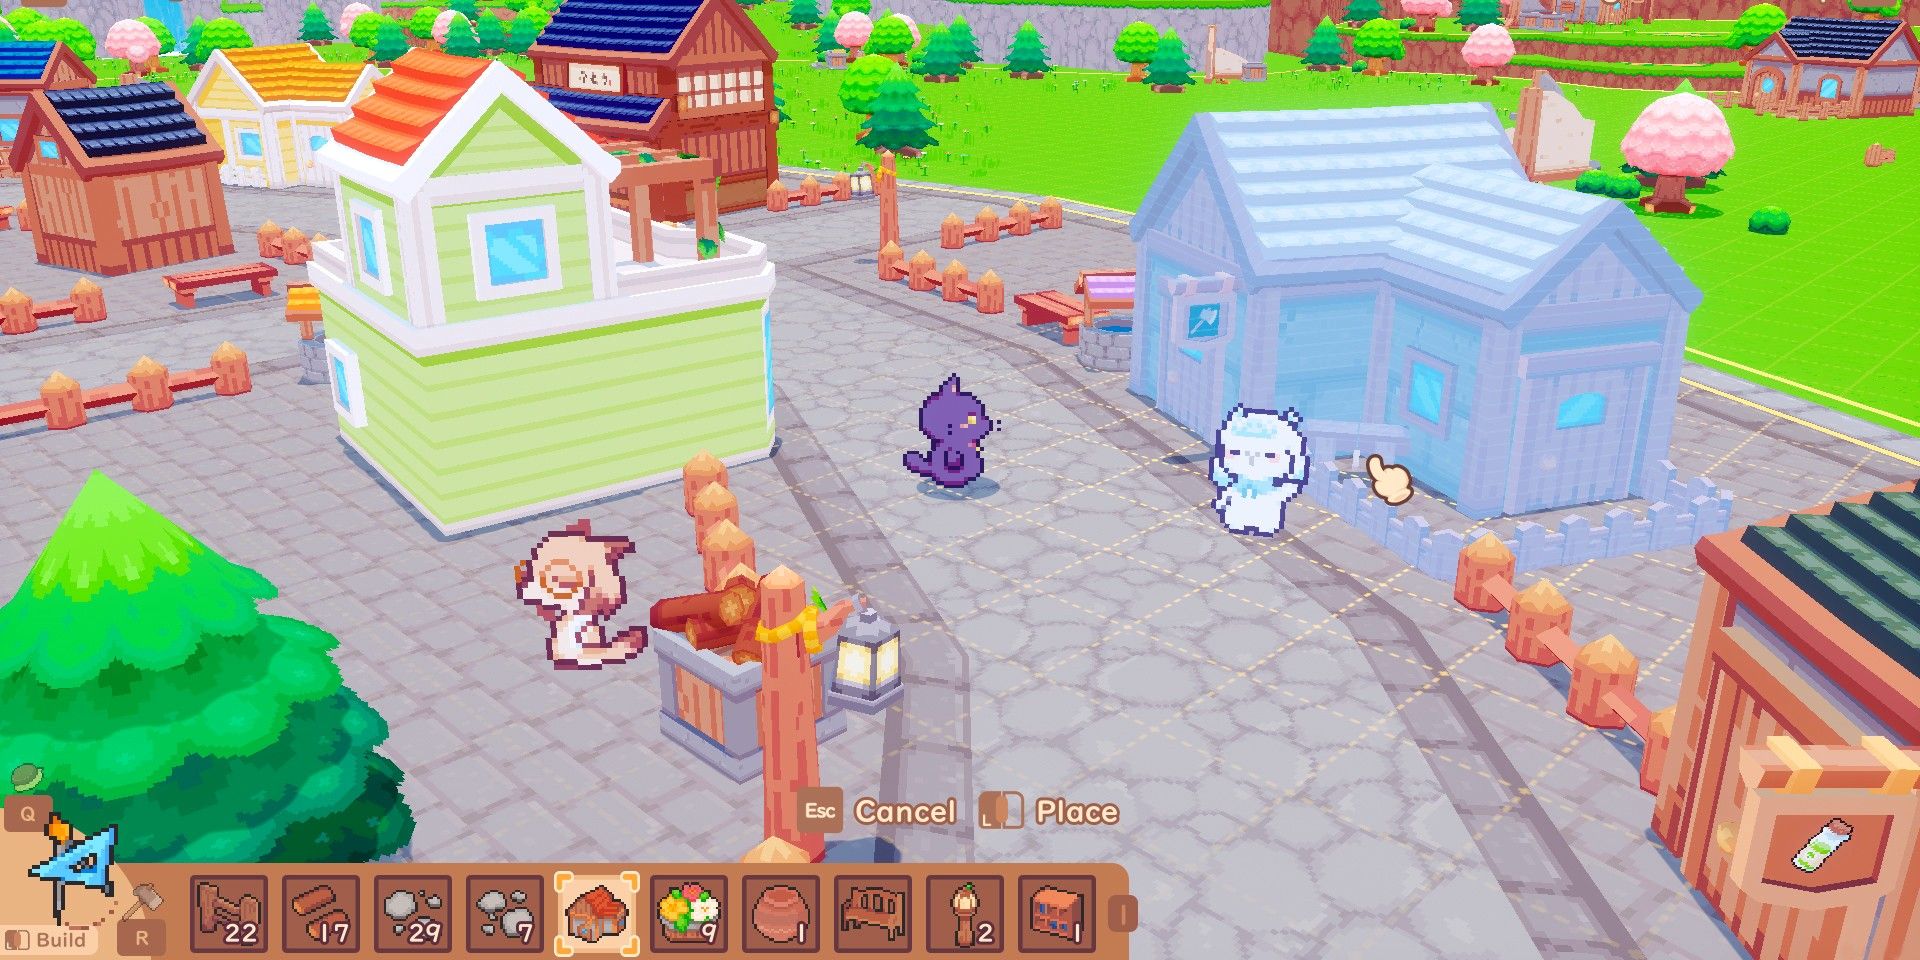 Screenshot depicting Momo placing a new house in town, as seen in Snacko: A Farming Cat-venture.